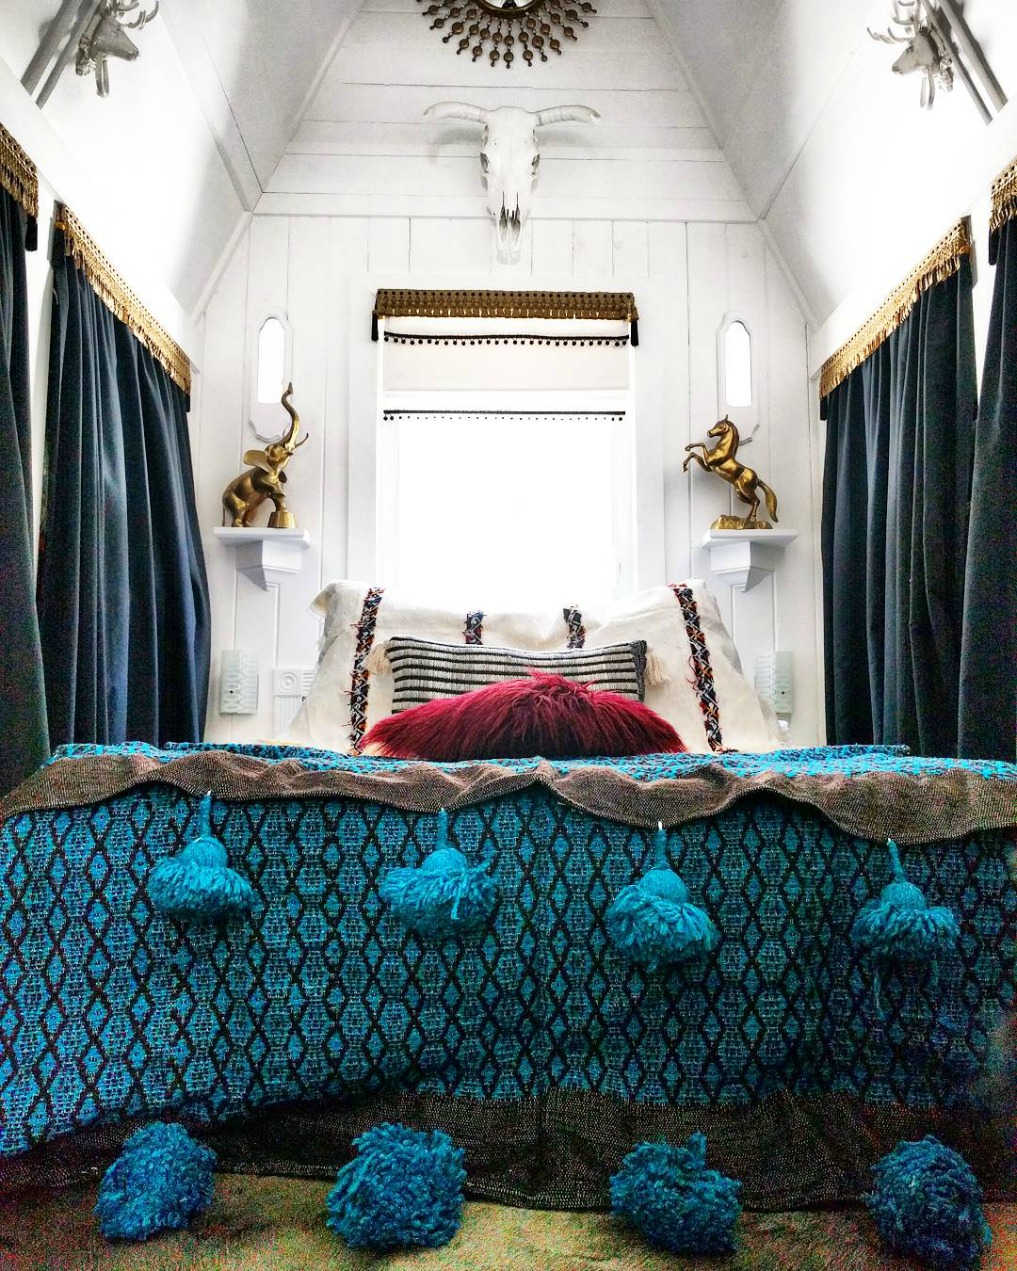 Eclectic Home Tour - Insieme House - tour this tiny house and this cozy master bedroom with clever storage solutions